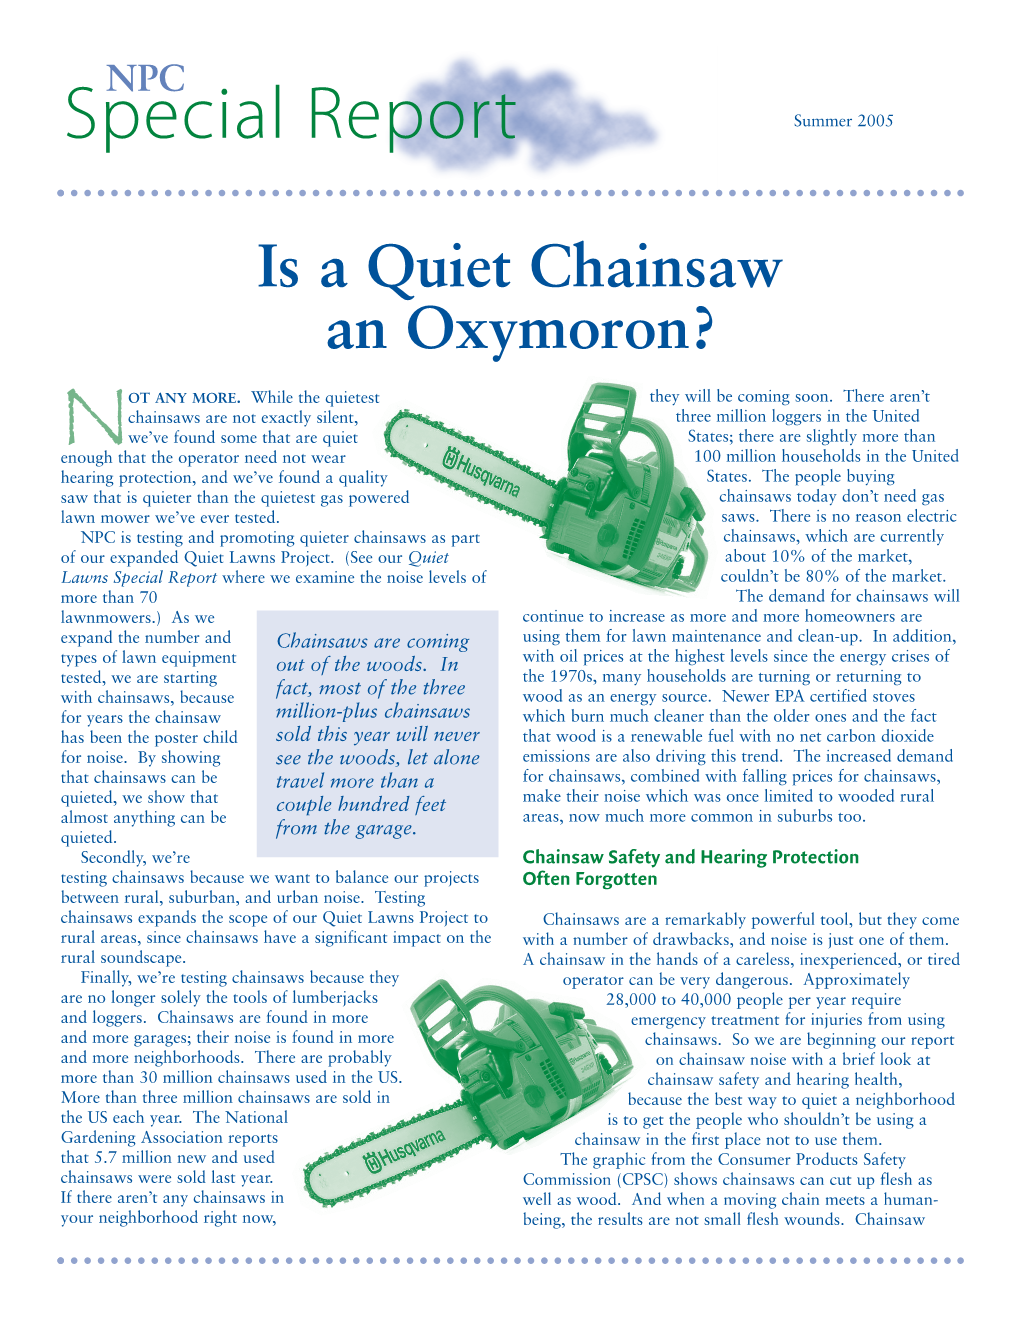 Is a Quiet Chainsaw an Oxymoron?